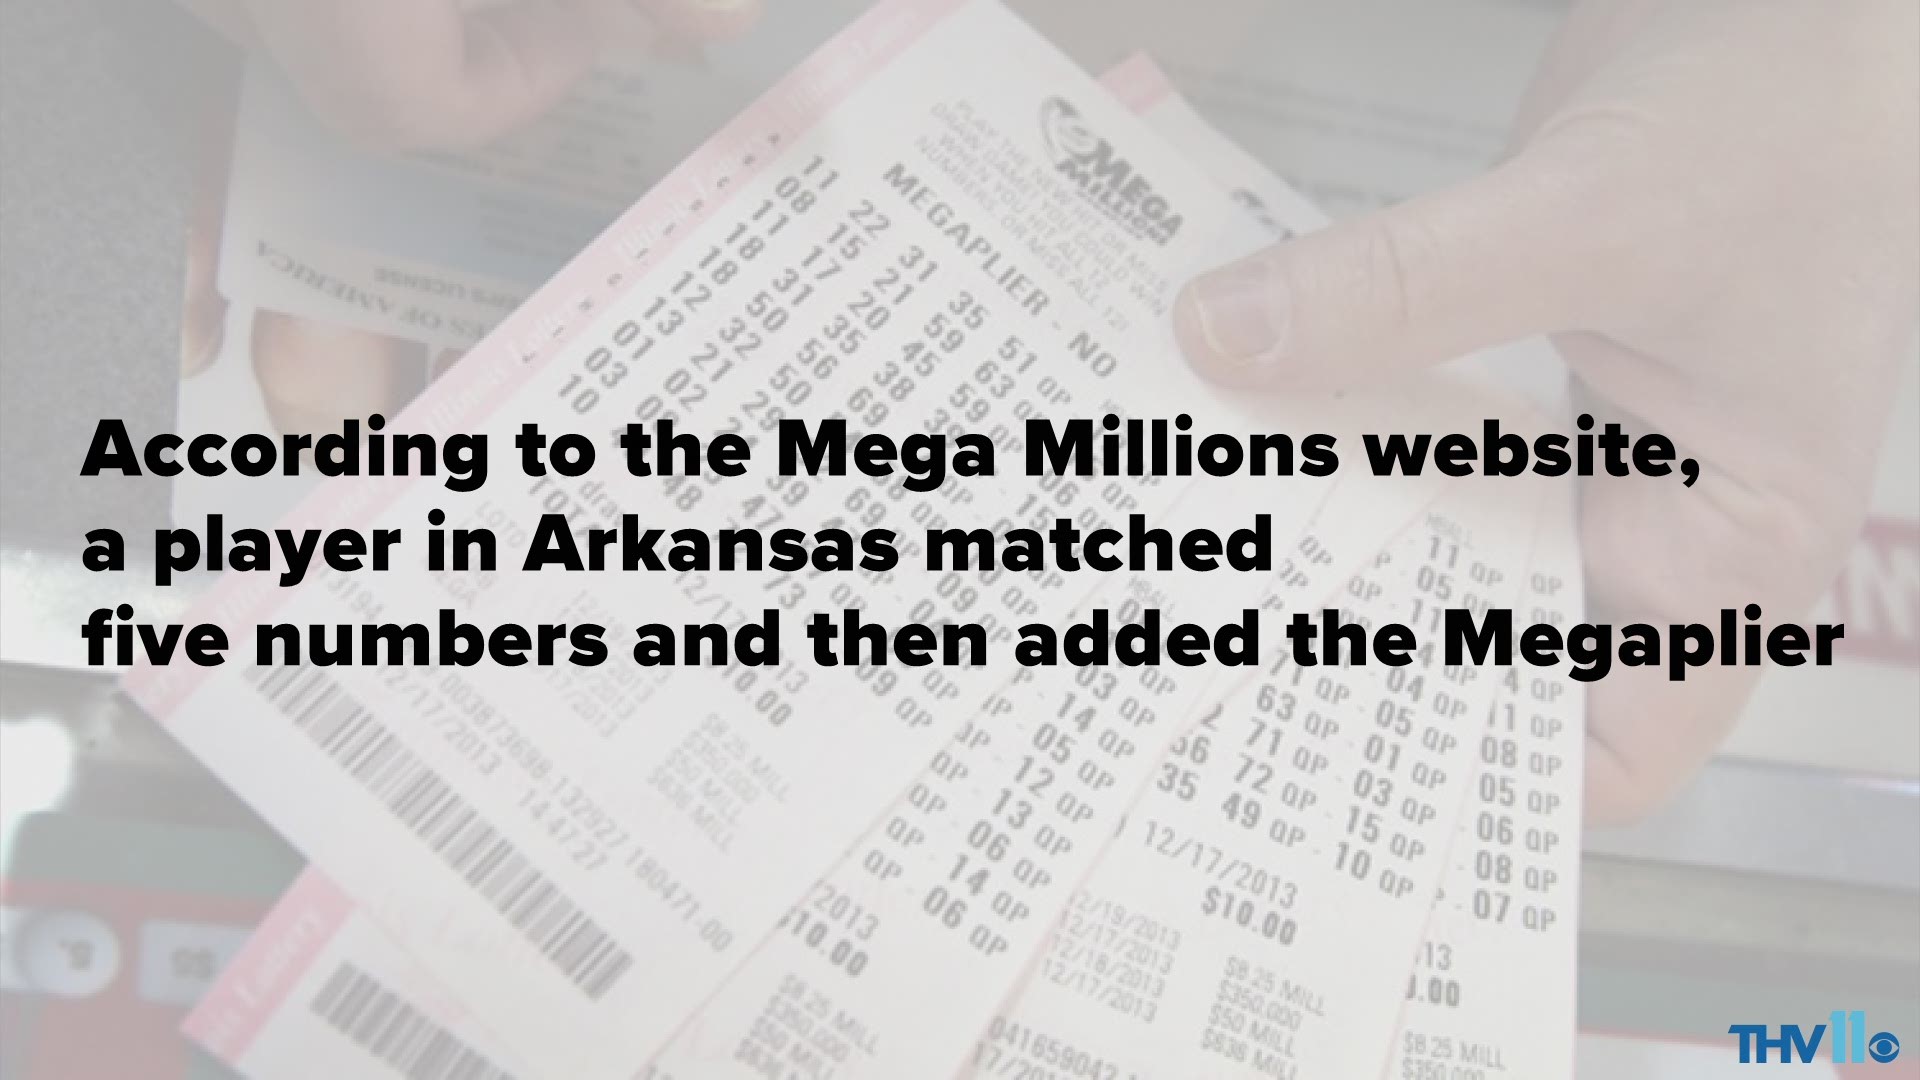 According to the Mega Millions website, a player in Arkansas matched five numbers and then added the Megaplier feature, bringing their total won to $2 million.